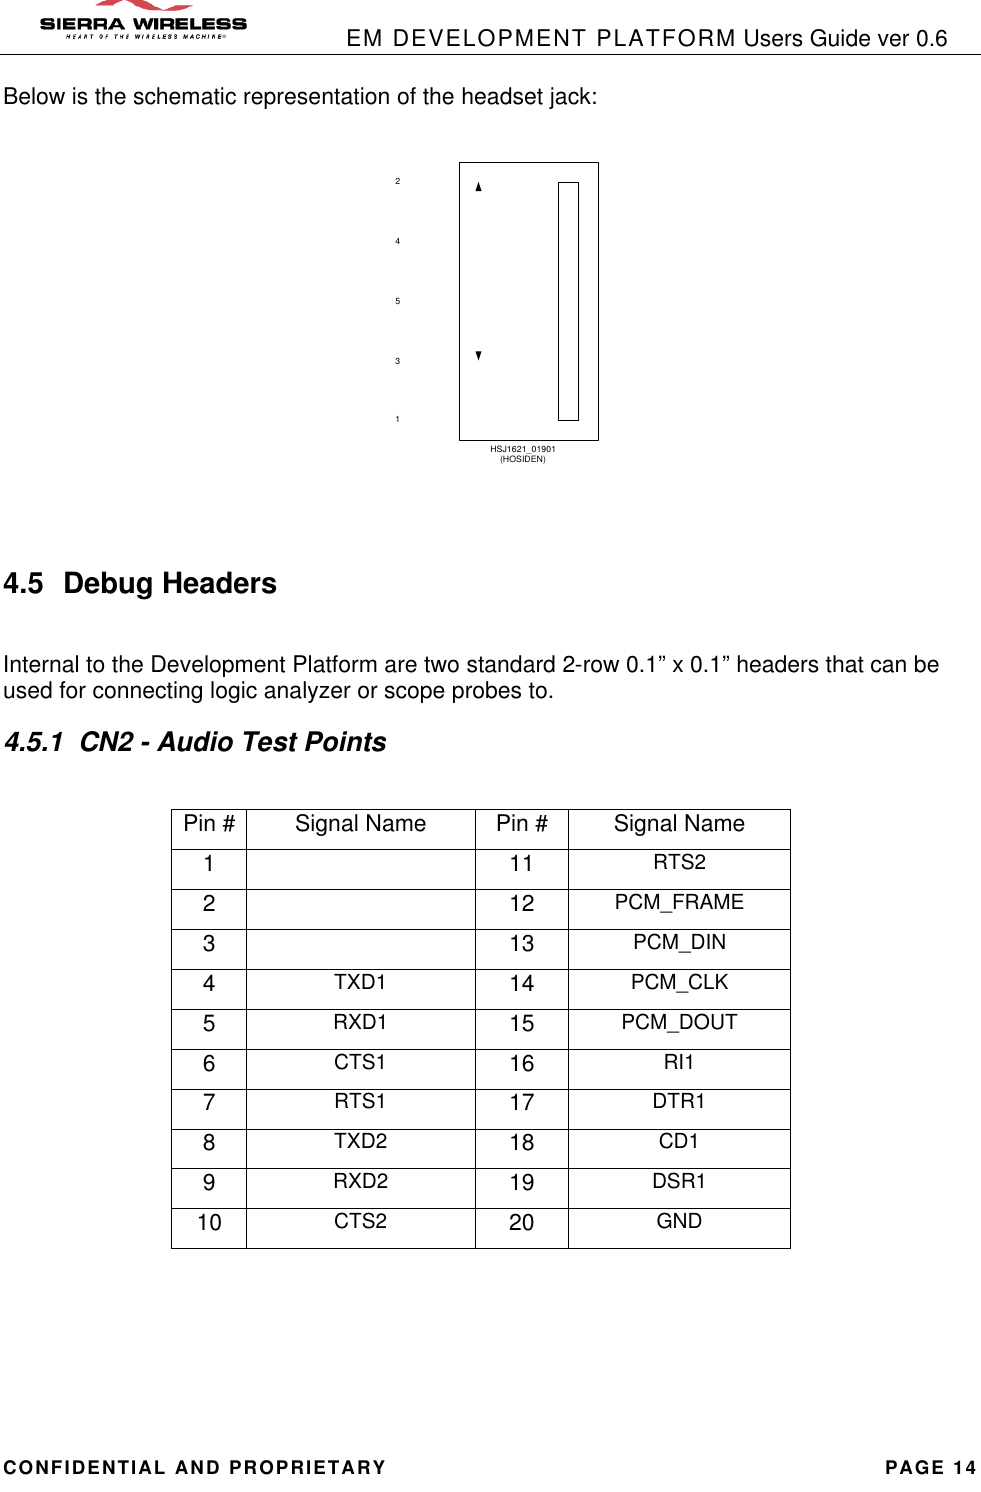            EM DEVELOPMENT PLATFORM Users Guide ver 0.6 CONFIDENTIAL AND PROPRIETARY PAGE 14 Below is the schematic representation of the headset jack:  HSJ1621_01901(HOSIDEN)24531   4.5 Debug Headers  Internal to the Development Platform are two standard 2-row 0.1” x 0.1” headers that can be used for connecting logic analyzer or scope probes to. 4.5.1  CN2 - Audio Test Points  Pin # Signal Name Pin # Signal Name 1  11 RTS2 2  12 PCM_FRAME 3  13 PCM_DIN 4 TXD1 14 PCM_CLK 5 RXD1 15 PCM_DOUT 6 CTS1 16 RI1 7 RTS1 17 DTR1 8 TXD2 18 CD1 9 RXD2 19 DSR1 10 CTS2 20 GND     